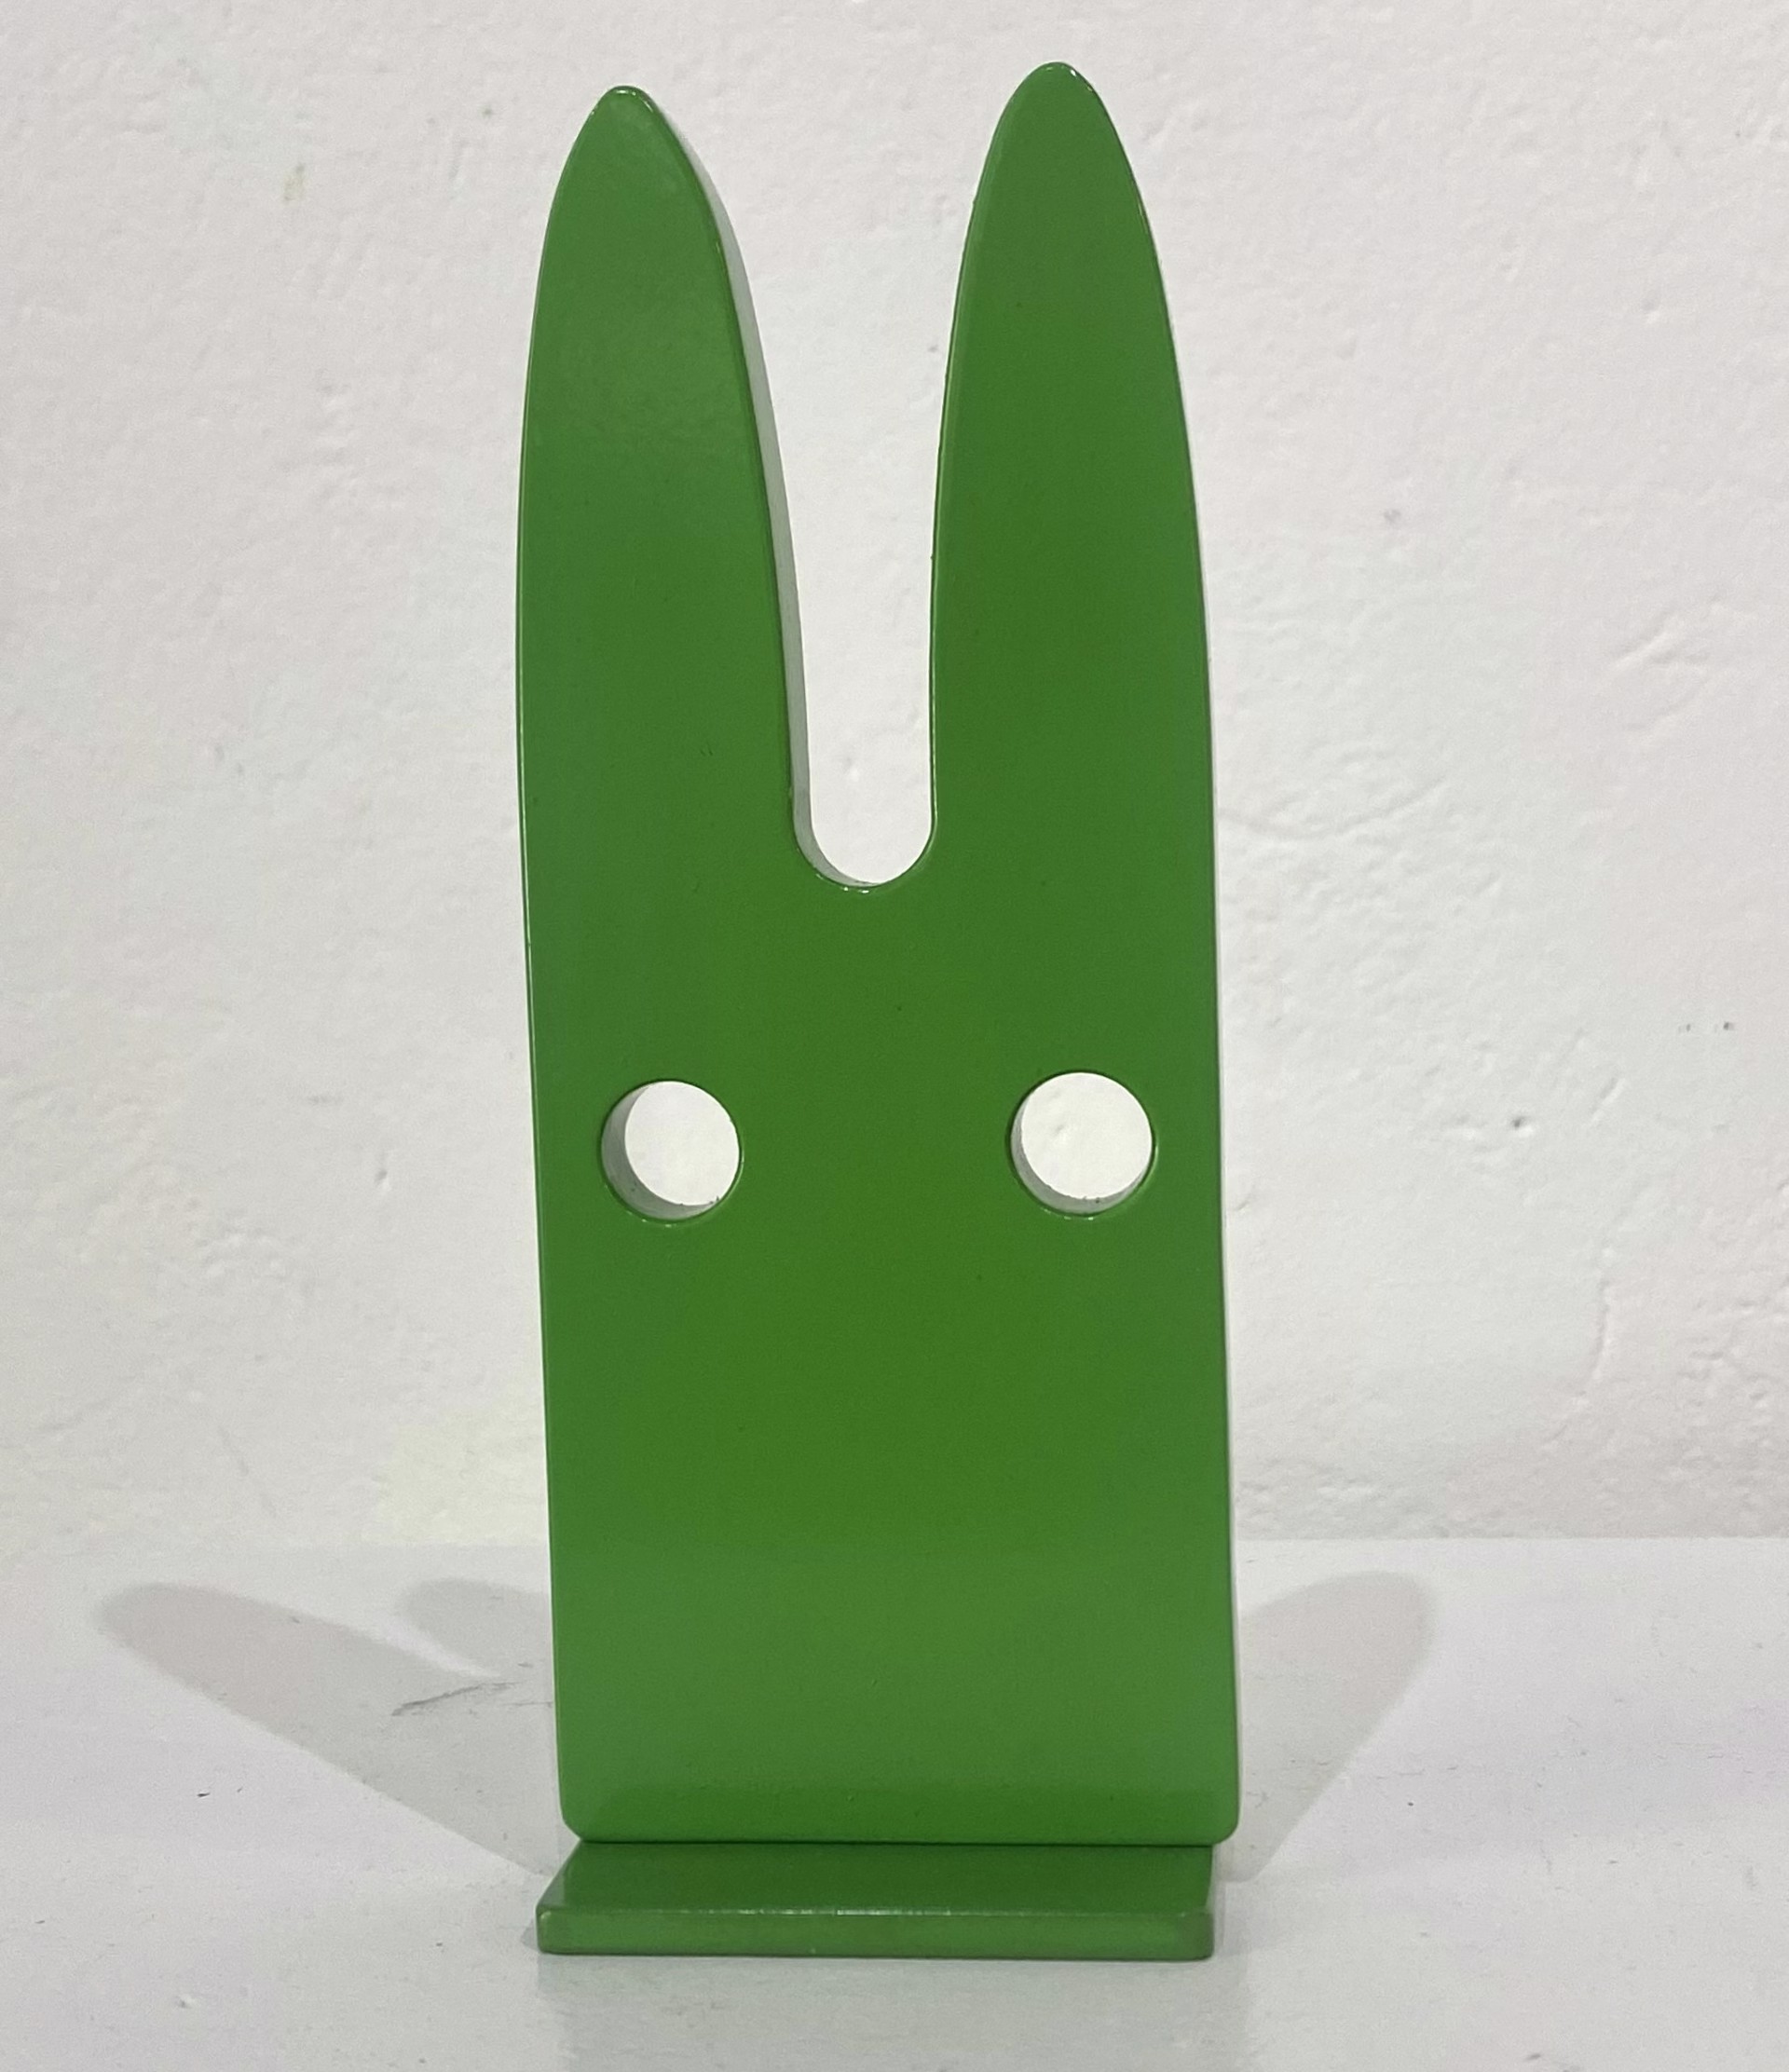 Green Bunny by Jeffie Brewer